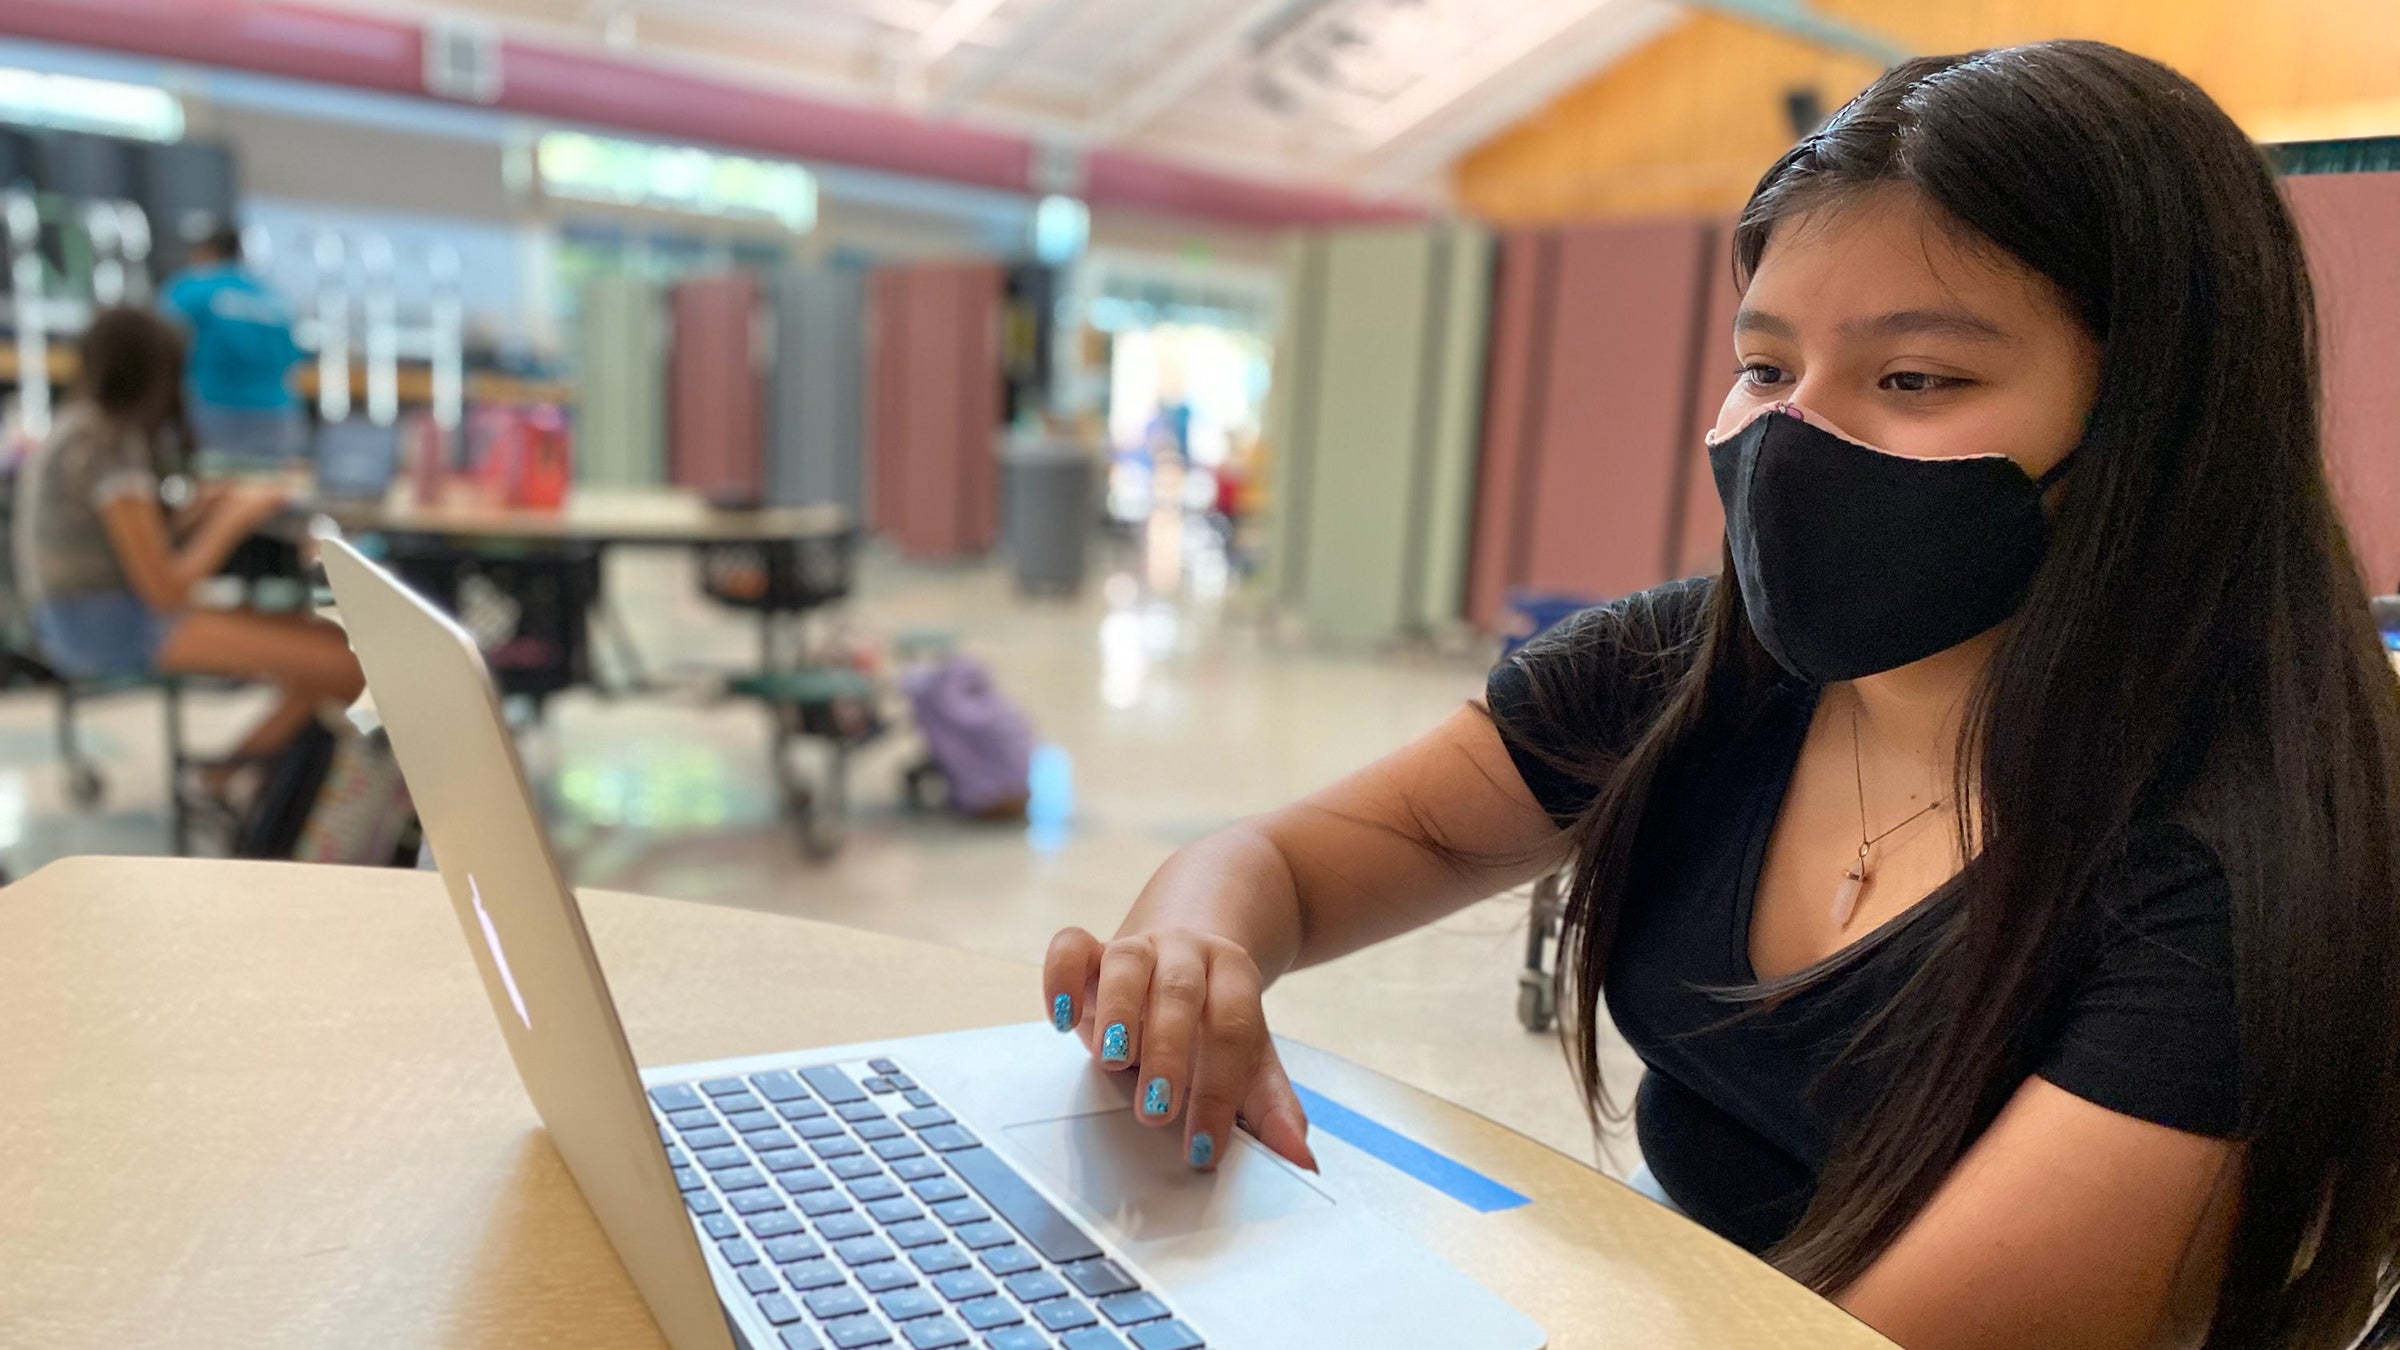 A student wearing a mask works on her laptop.